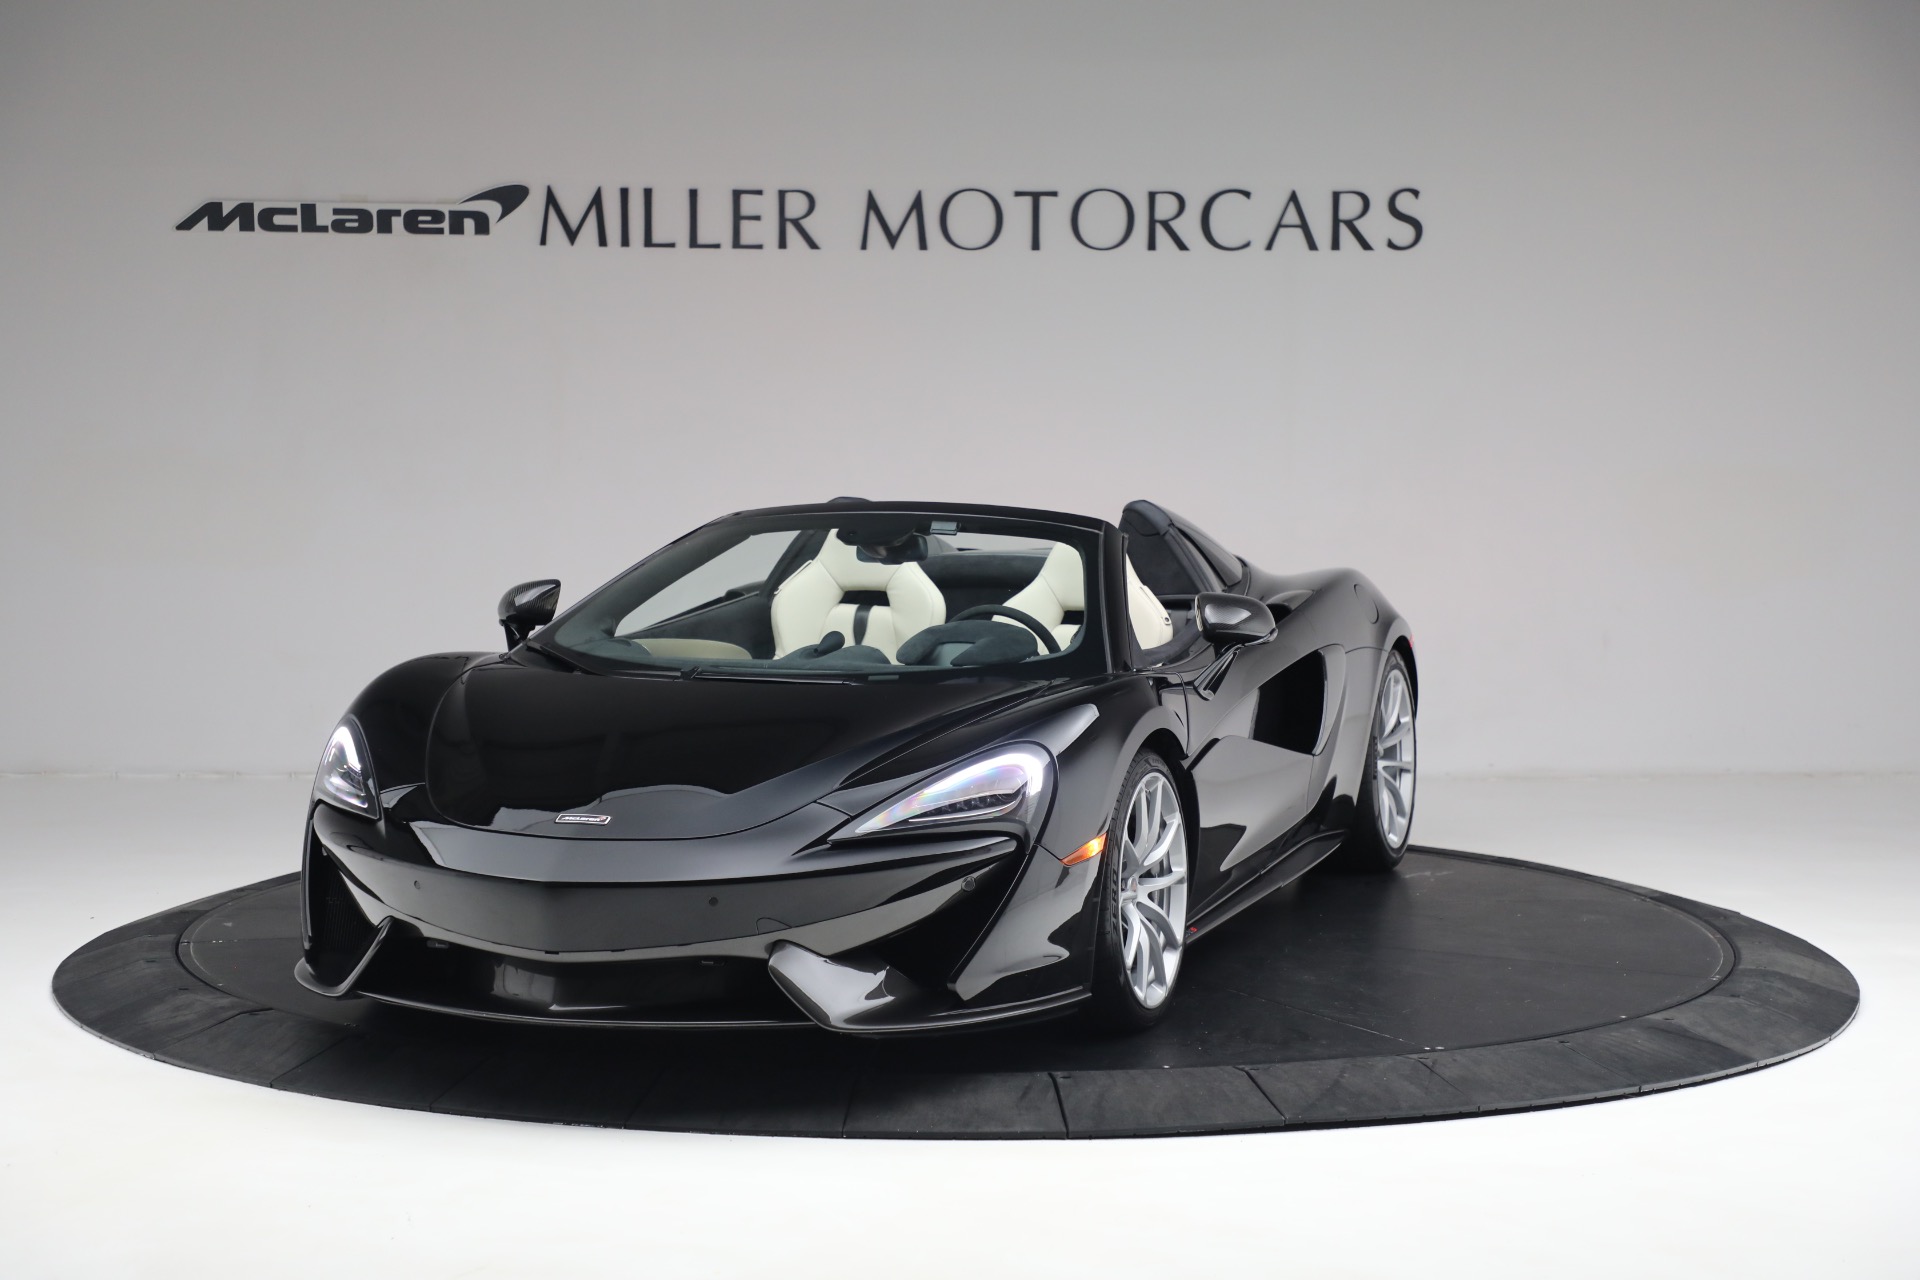 Used 2018 McLaren 570S Spider for sale Sold at Alfa Romeo of Greenwich in Greenwich CT 06830 1